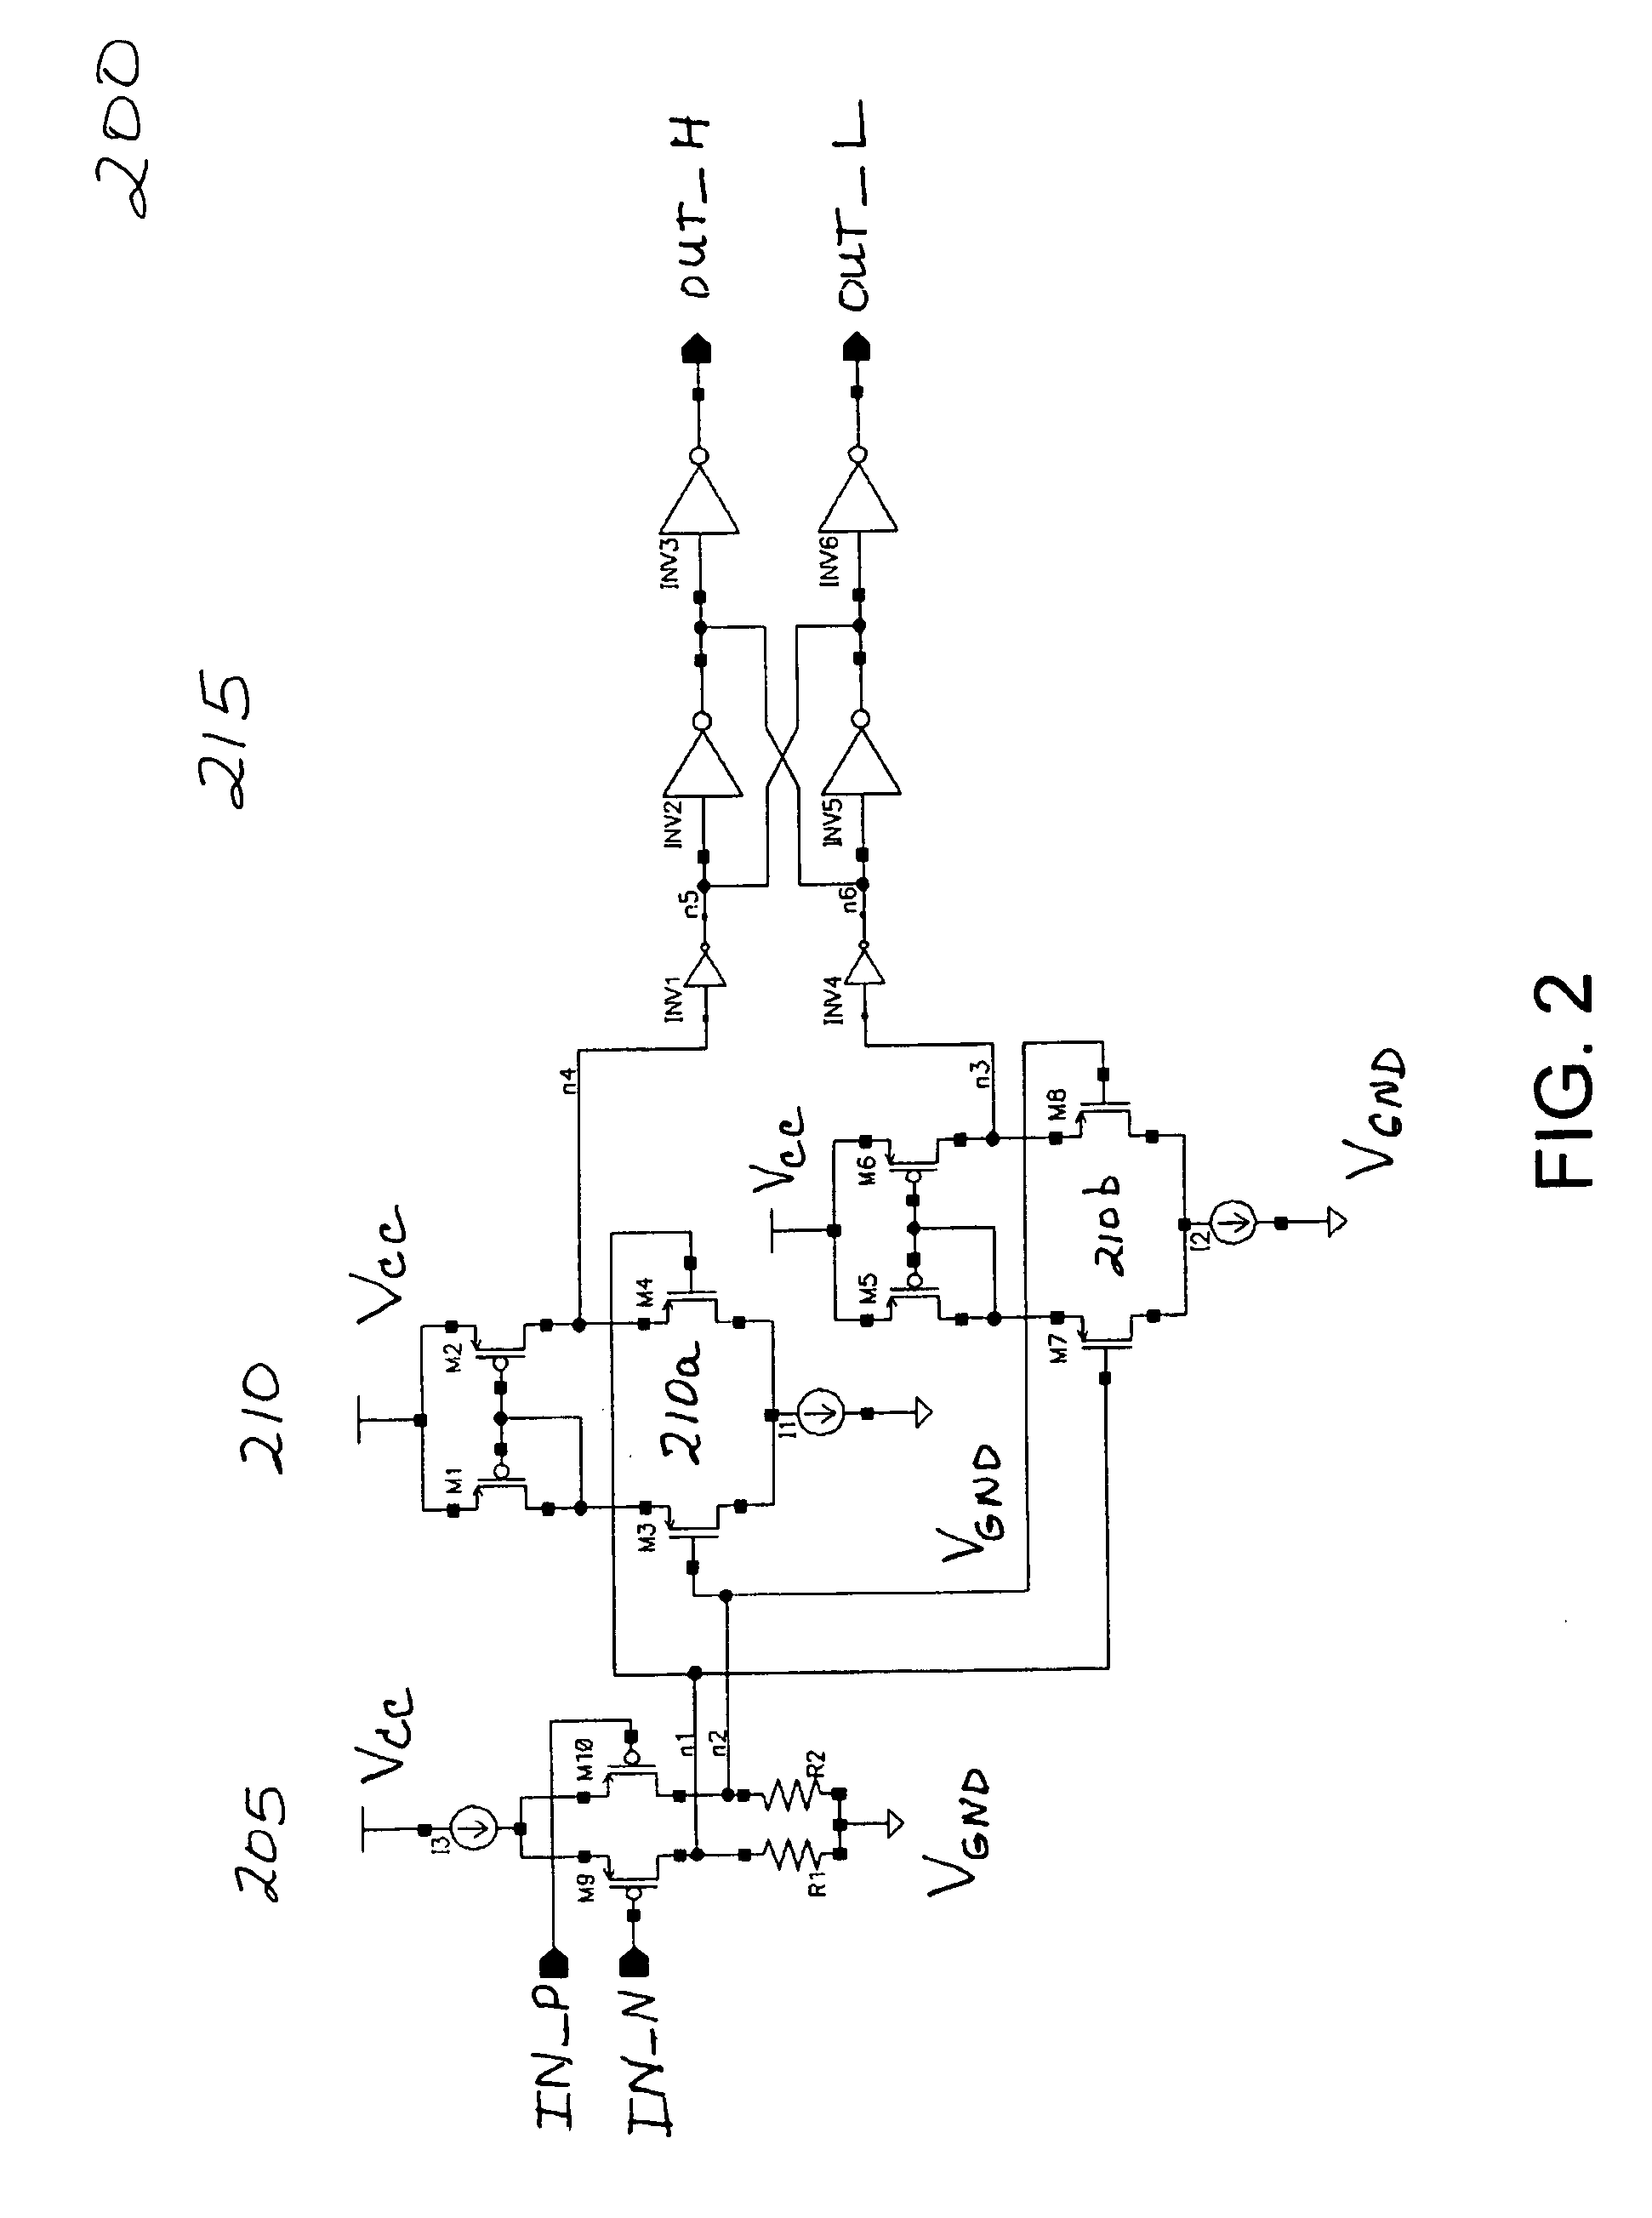 Method and circuit for translating a differential signal to complementary CMOS levels